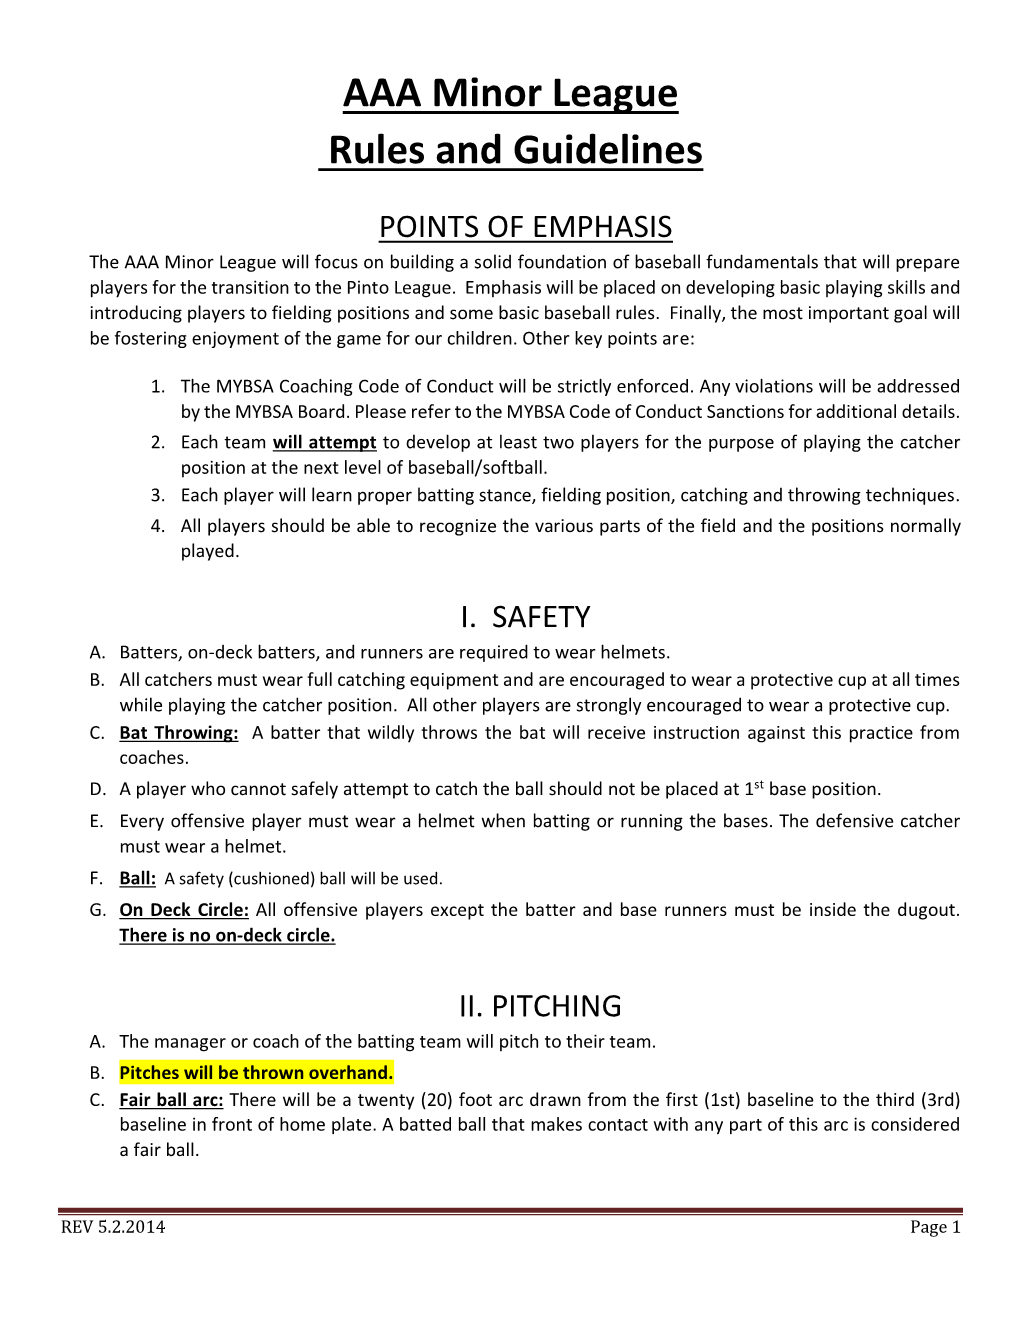 AAA Minor League Rules and Guidelines